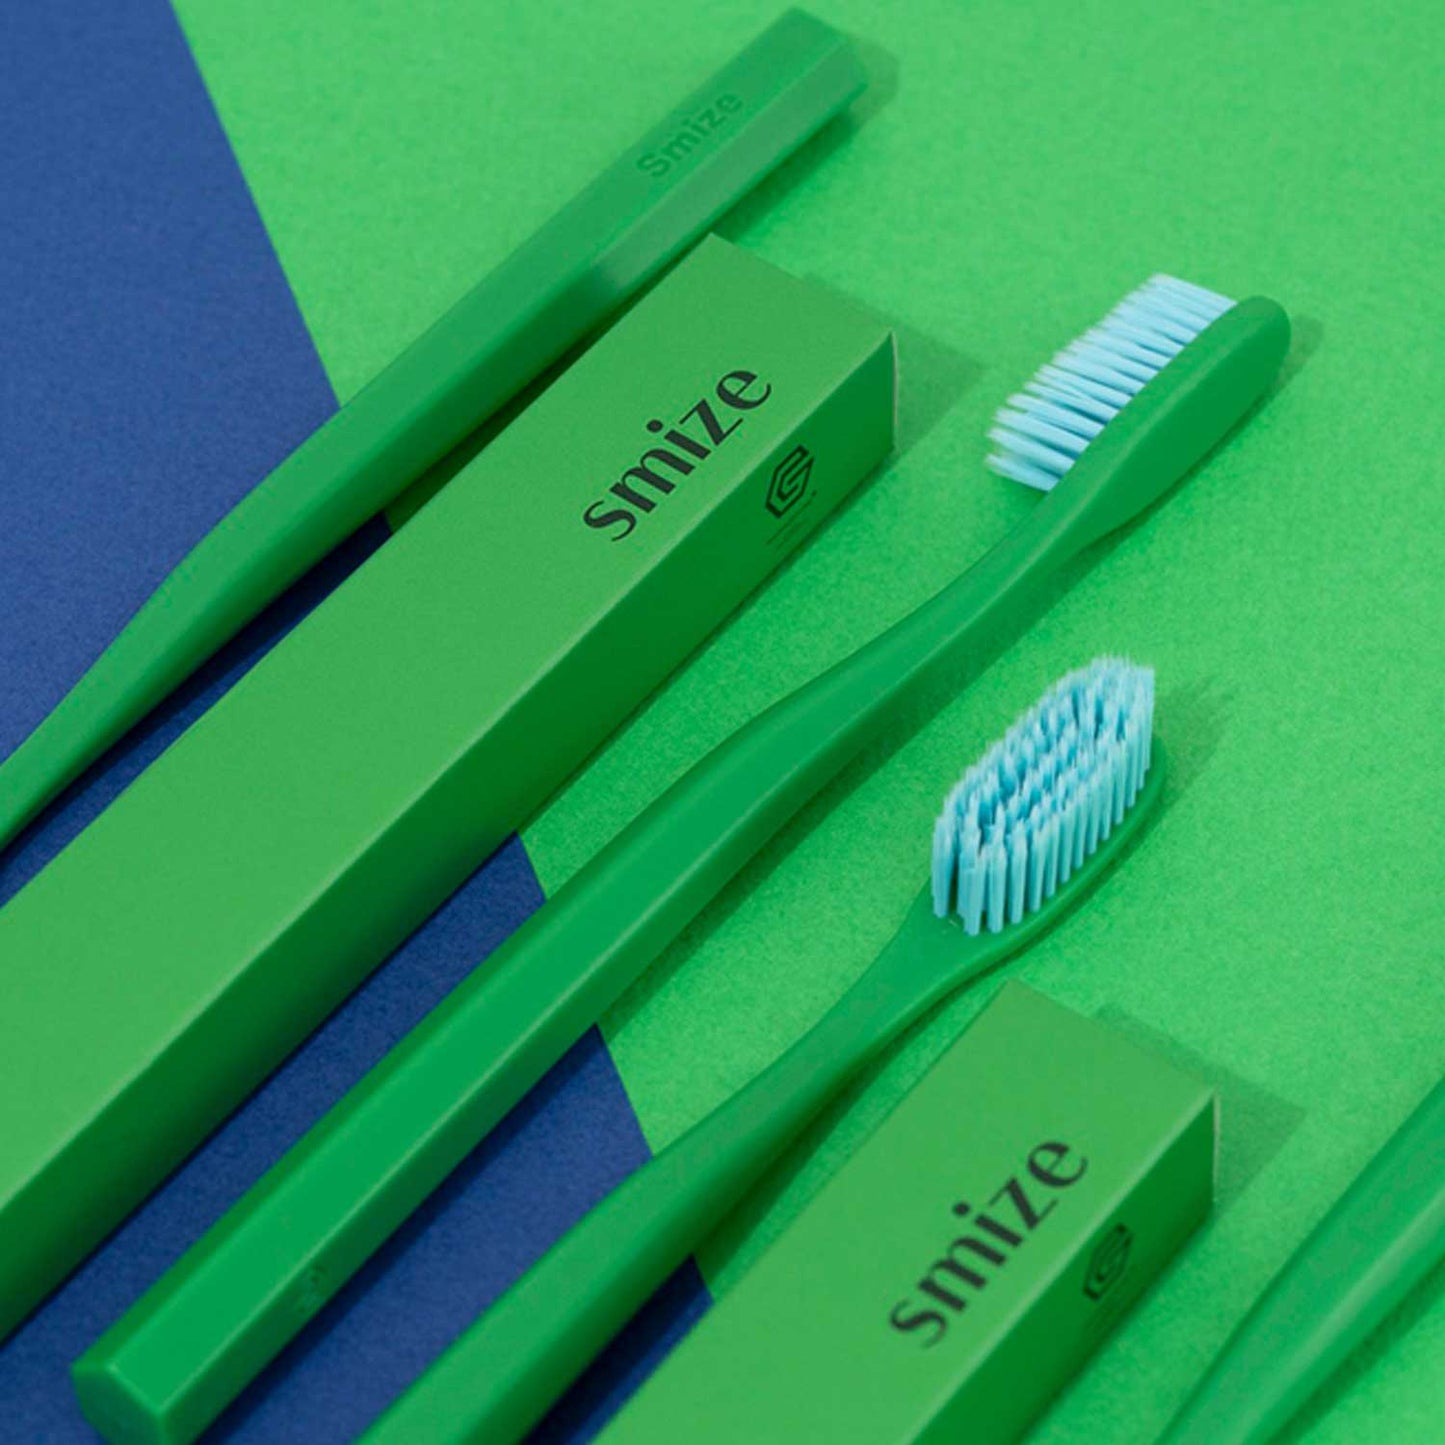 Load image into Gallery viewer, smize Toothbrush Green
